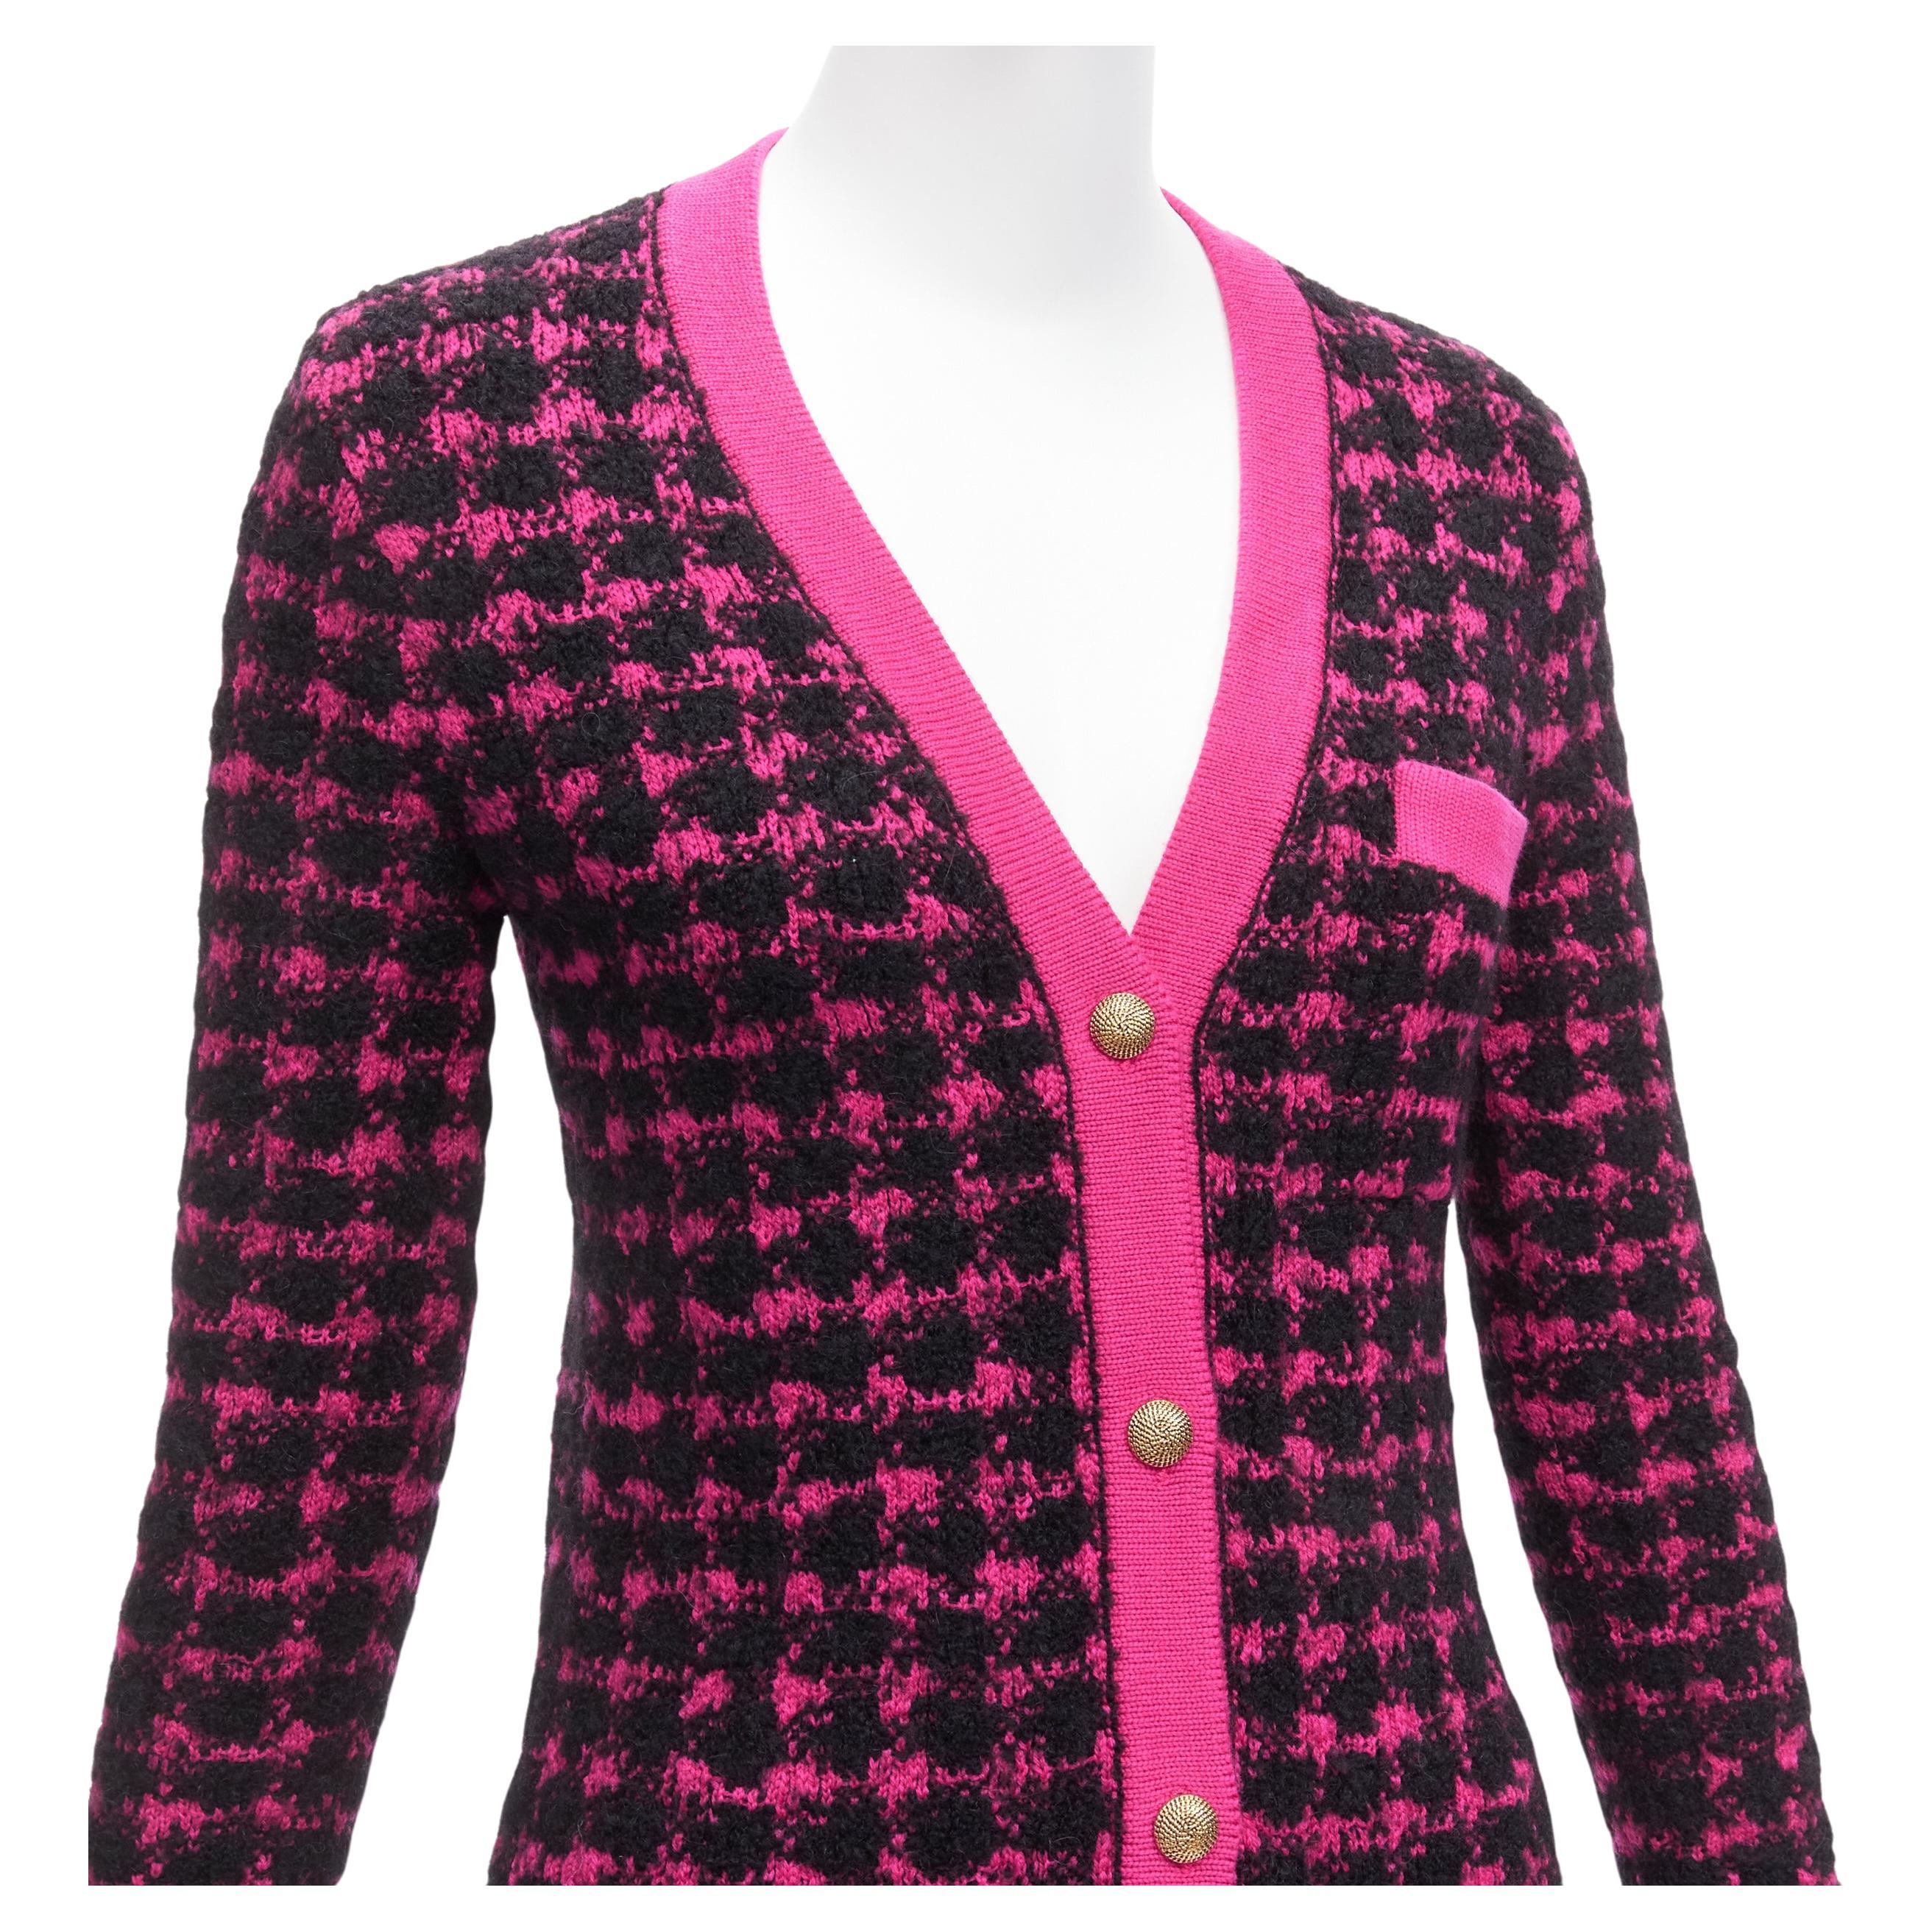 SAINT LAURENT 2021 black pink houndstooth wool alpaca preppy cardigan jacket XS
Reference: AAWC/A00462
Brand: Saint Laurent
Designer: Anthony Vaccarello
Collection: 2021
Material: Wool, Alpaca, Blend
Color: Pink, Black
Pattern: Houndstooth
Closure: